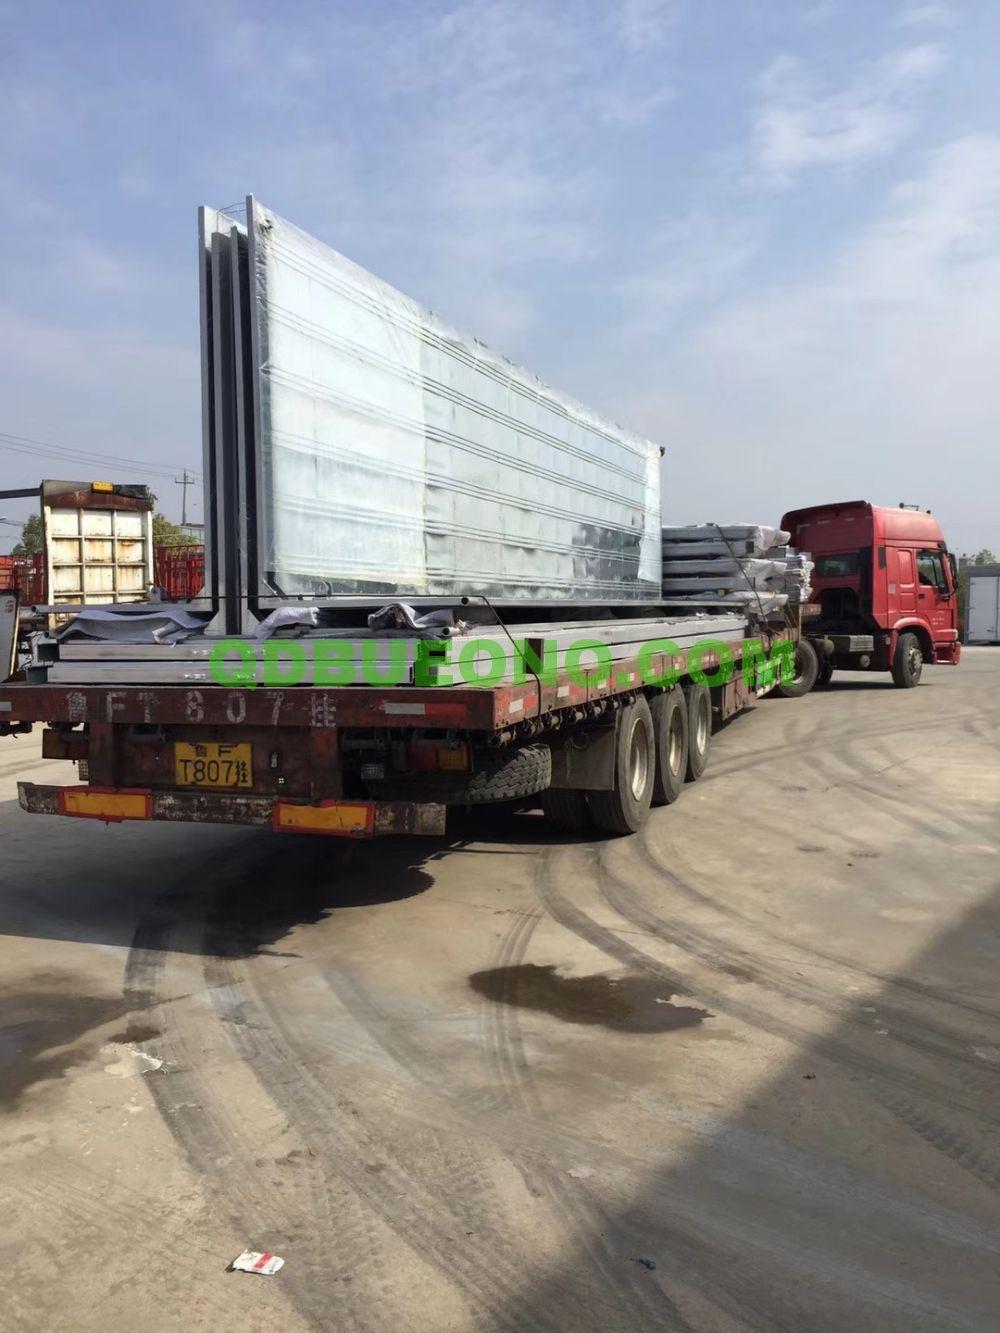 China Manufacturing Steel Heavy Open Wing Van Body for Cargo Truck